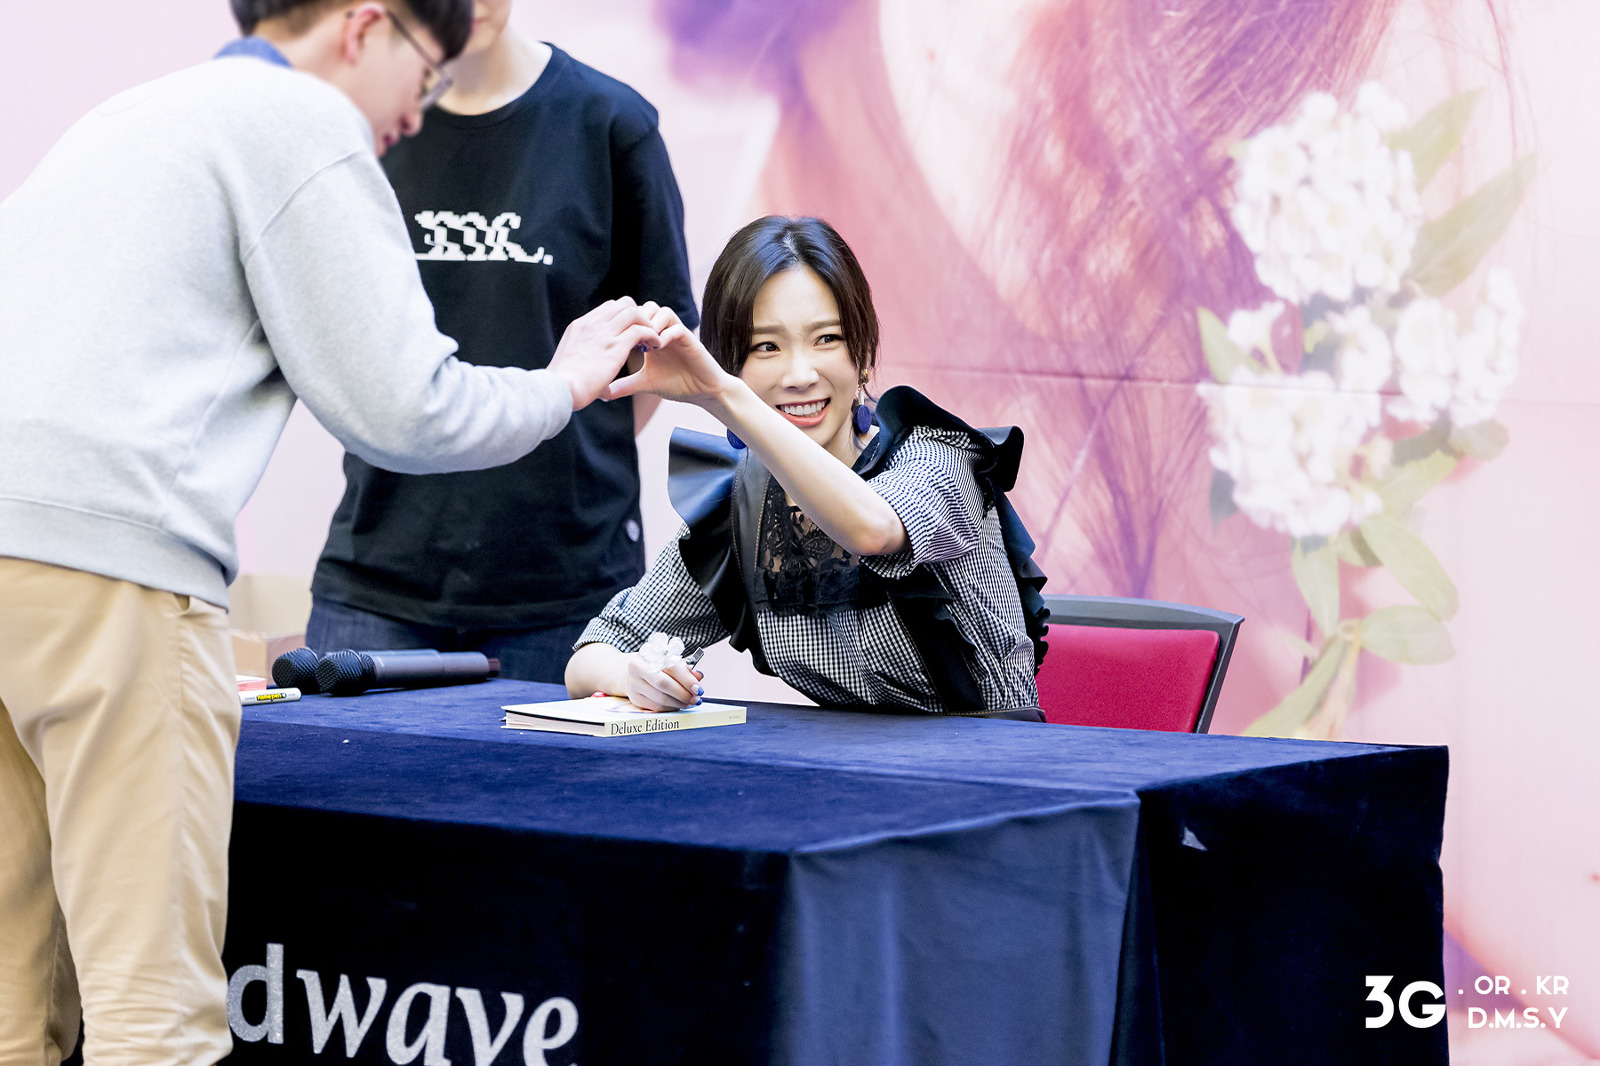 [PIC][16-04-2017]TaeYeon tham dự buổi Fansign cho “MY VOICE DELUXE EDITION” tại AK PLAZA vào chiều nay  - Page 5 2471AE4358FDD8D9018A6D